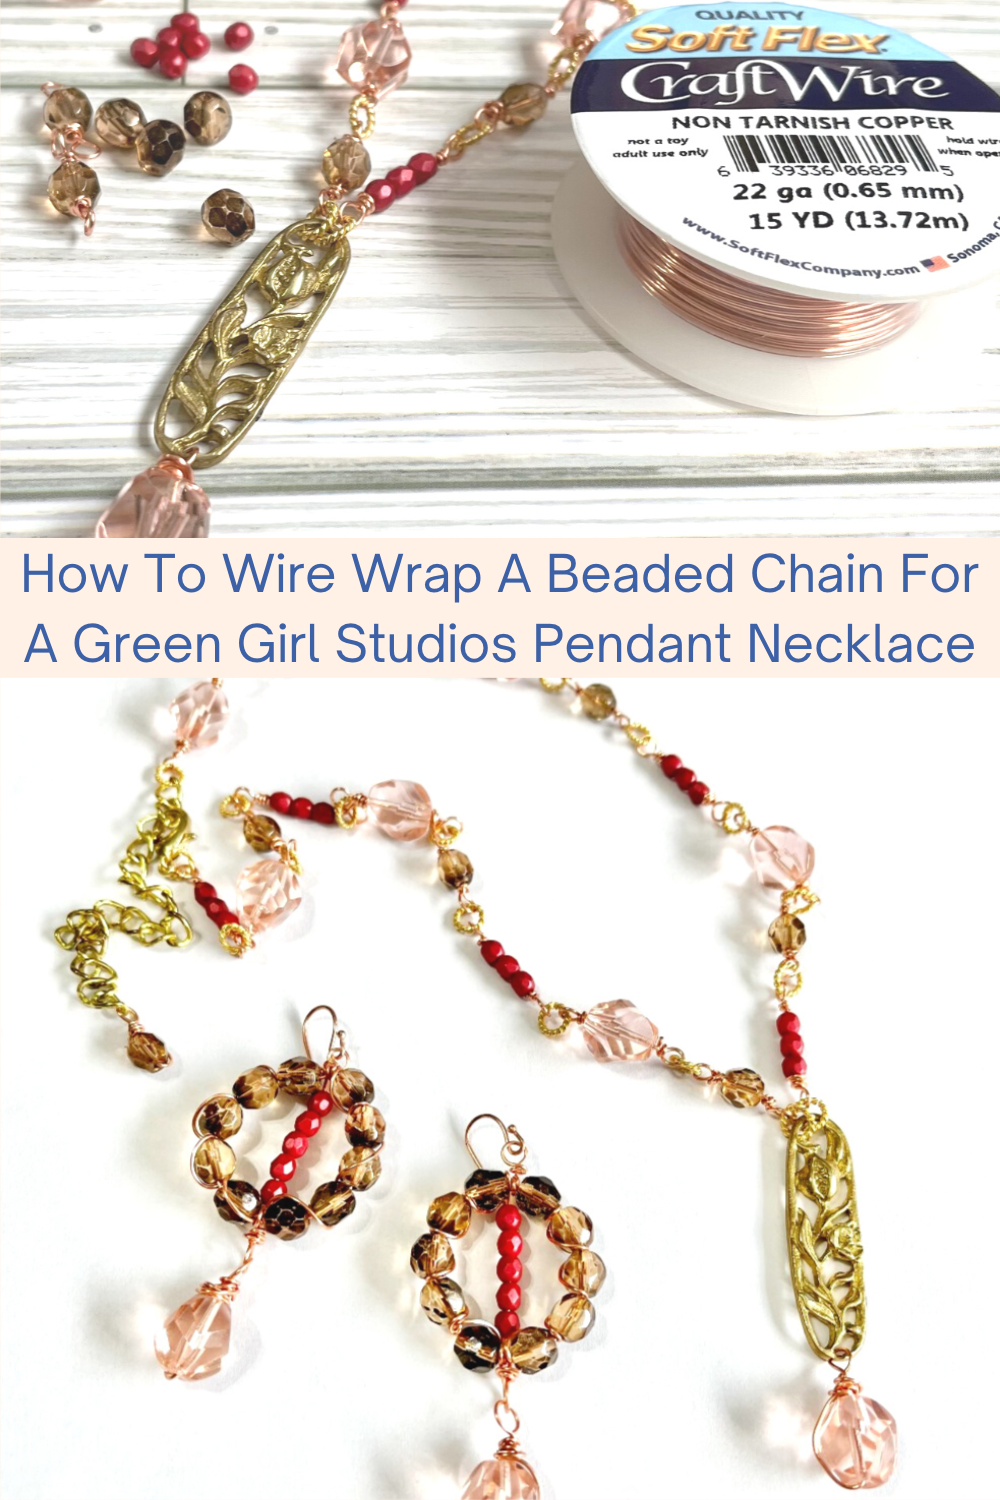 How To Wire Wrap A Beaded Chain For A Green Girl Studios Pendant Necklace Collage